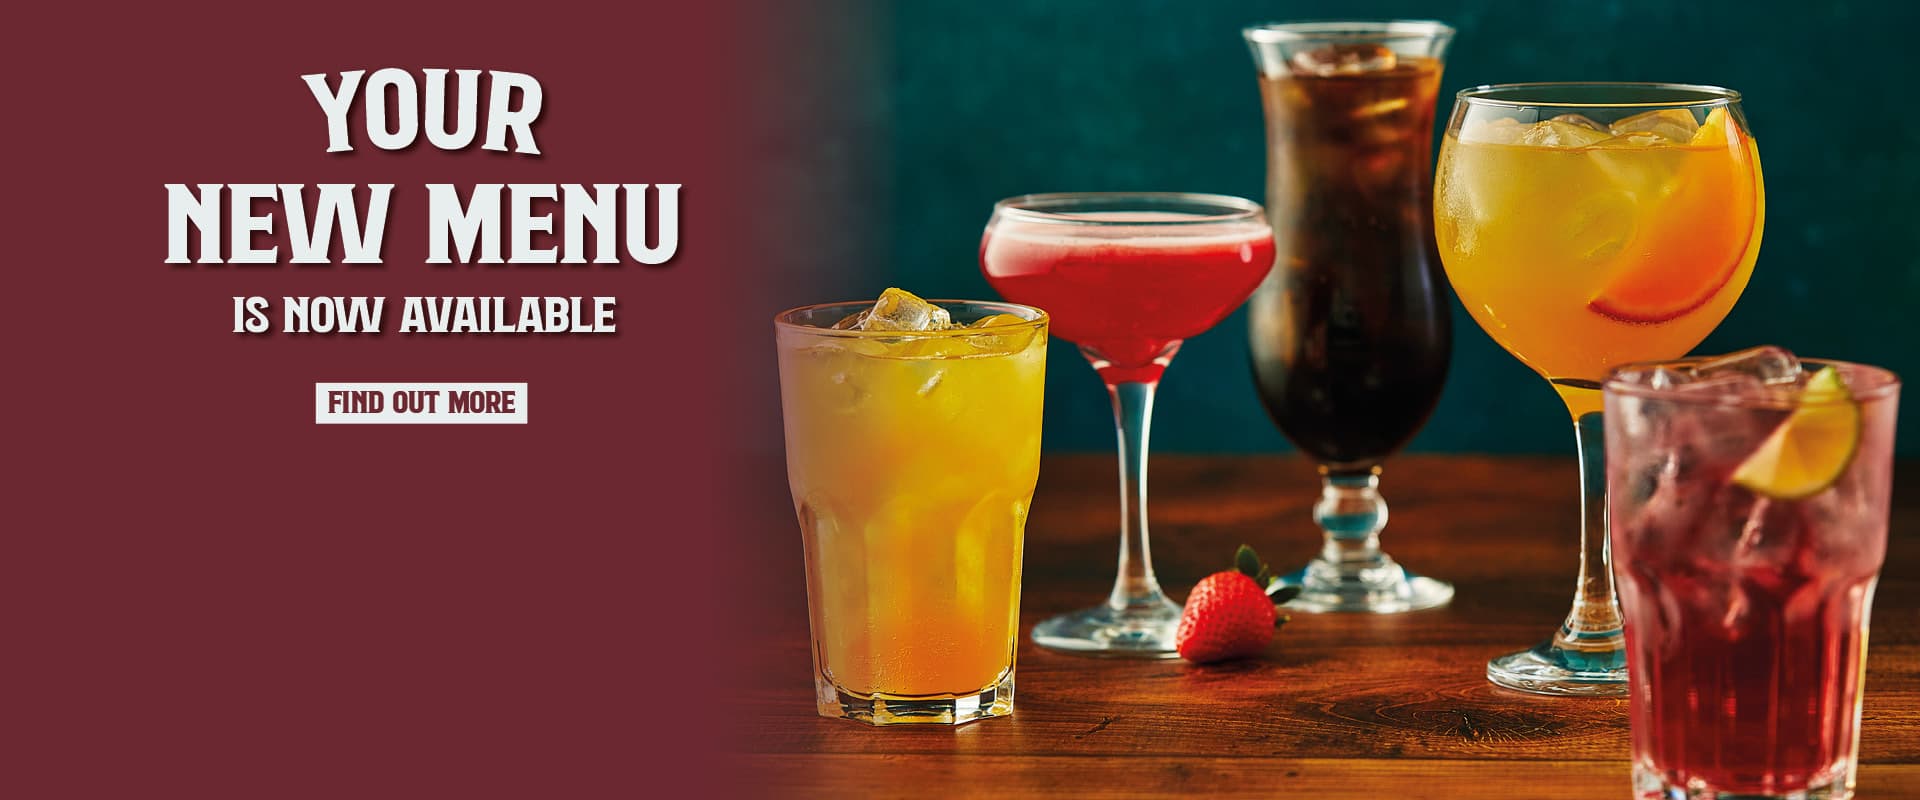 Your new drinks menu at The Station Inn